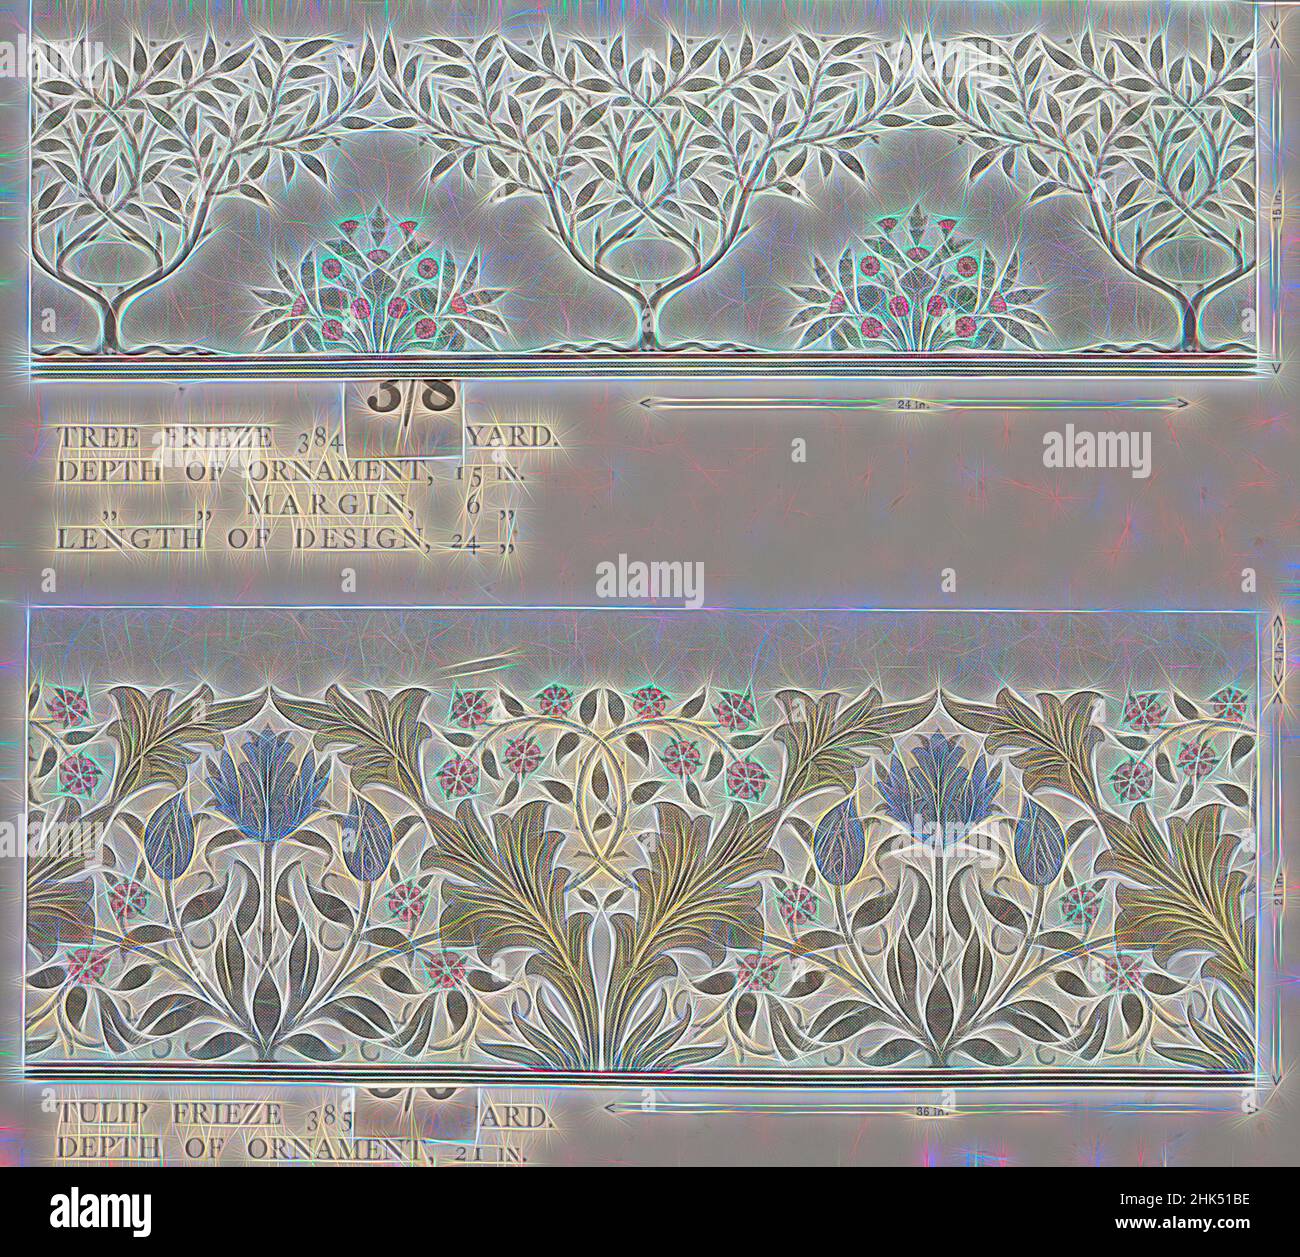 https://c8.alamy.com/comp/2HK51BE/inspired-by-wallpaper-sample-book-printed-paper-london-england-before-1917-21-12-x-14-12-in-546-x-368-cm-acanthus-arts-and-crafts-botanical-decor-fabric-design-floral-flowers-home-decor-interior-design-leaves-mirror-image-pastels-patterns-repeat-pattern-textile-design-reimagined-by-artotop-classic-art-reinvented-with-a-modern-twist-design-of-warm-cheerful-glowing-of-brightness-and-light-ray-radiance-photography-inspired-by-surrealism-and-futurism-embracing-dynamic-energy-of-modern-technology-movement-speed-and-revolutionize-culture-2HK51BE.jpg